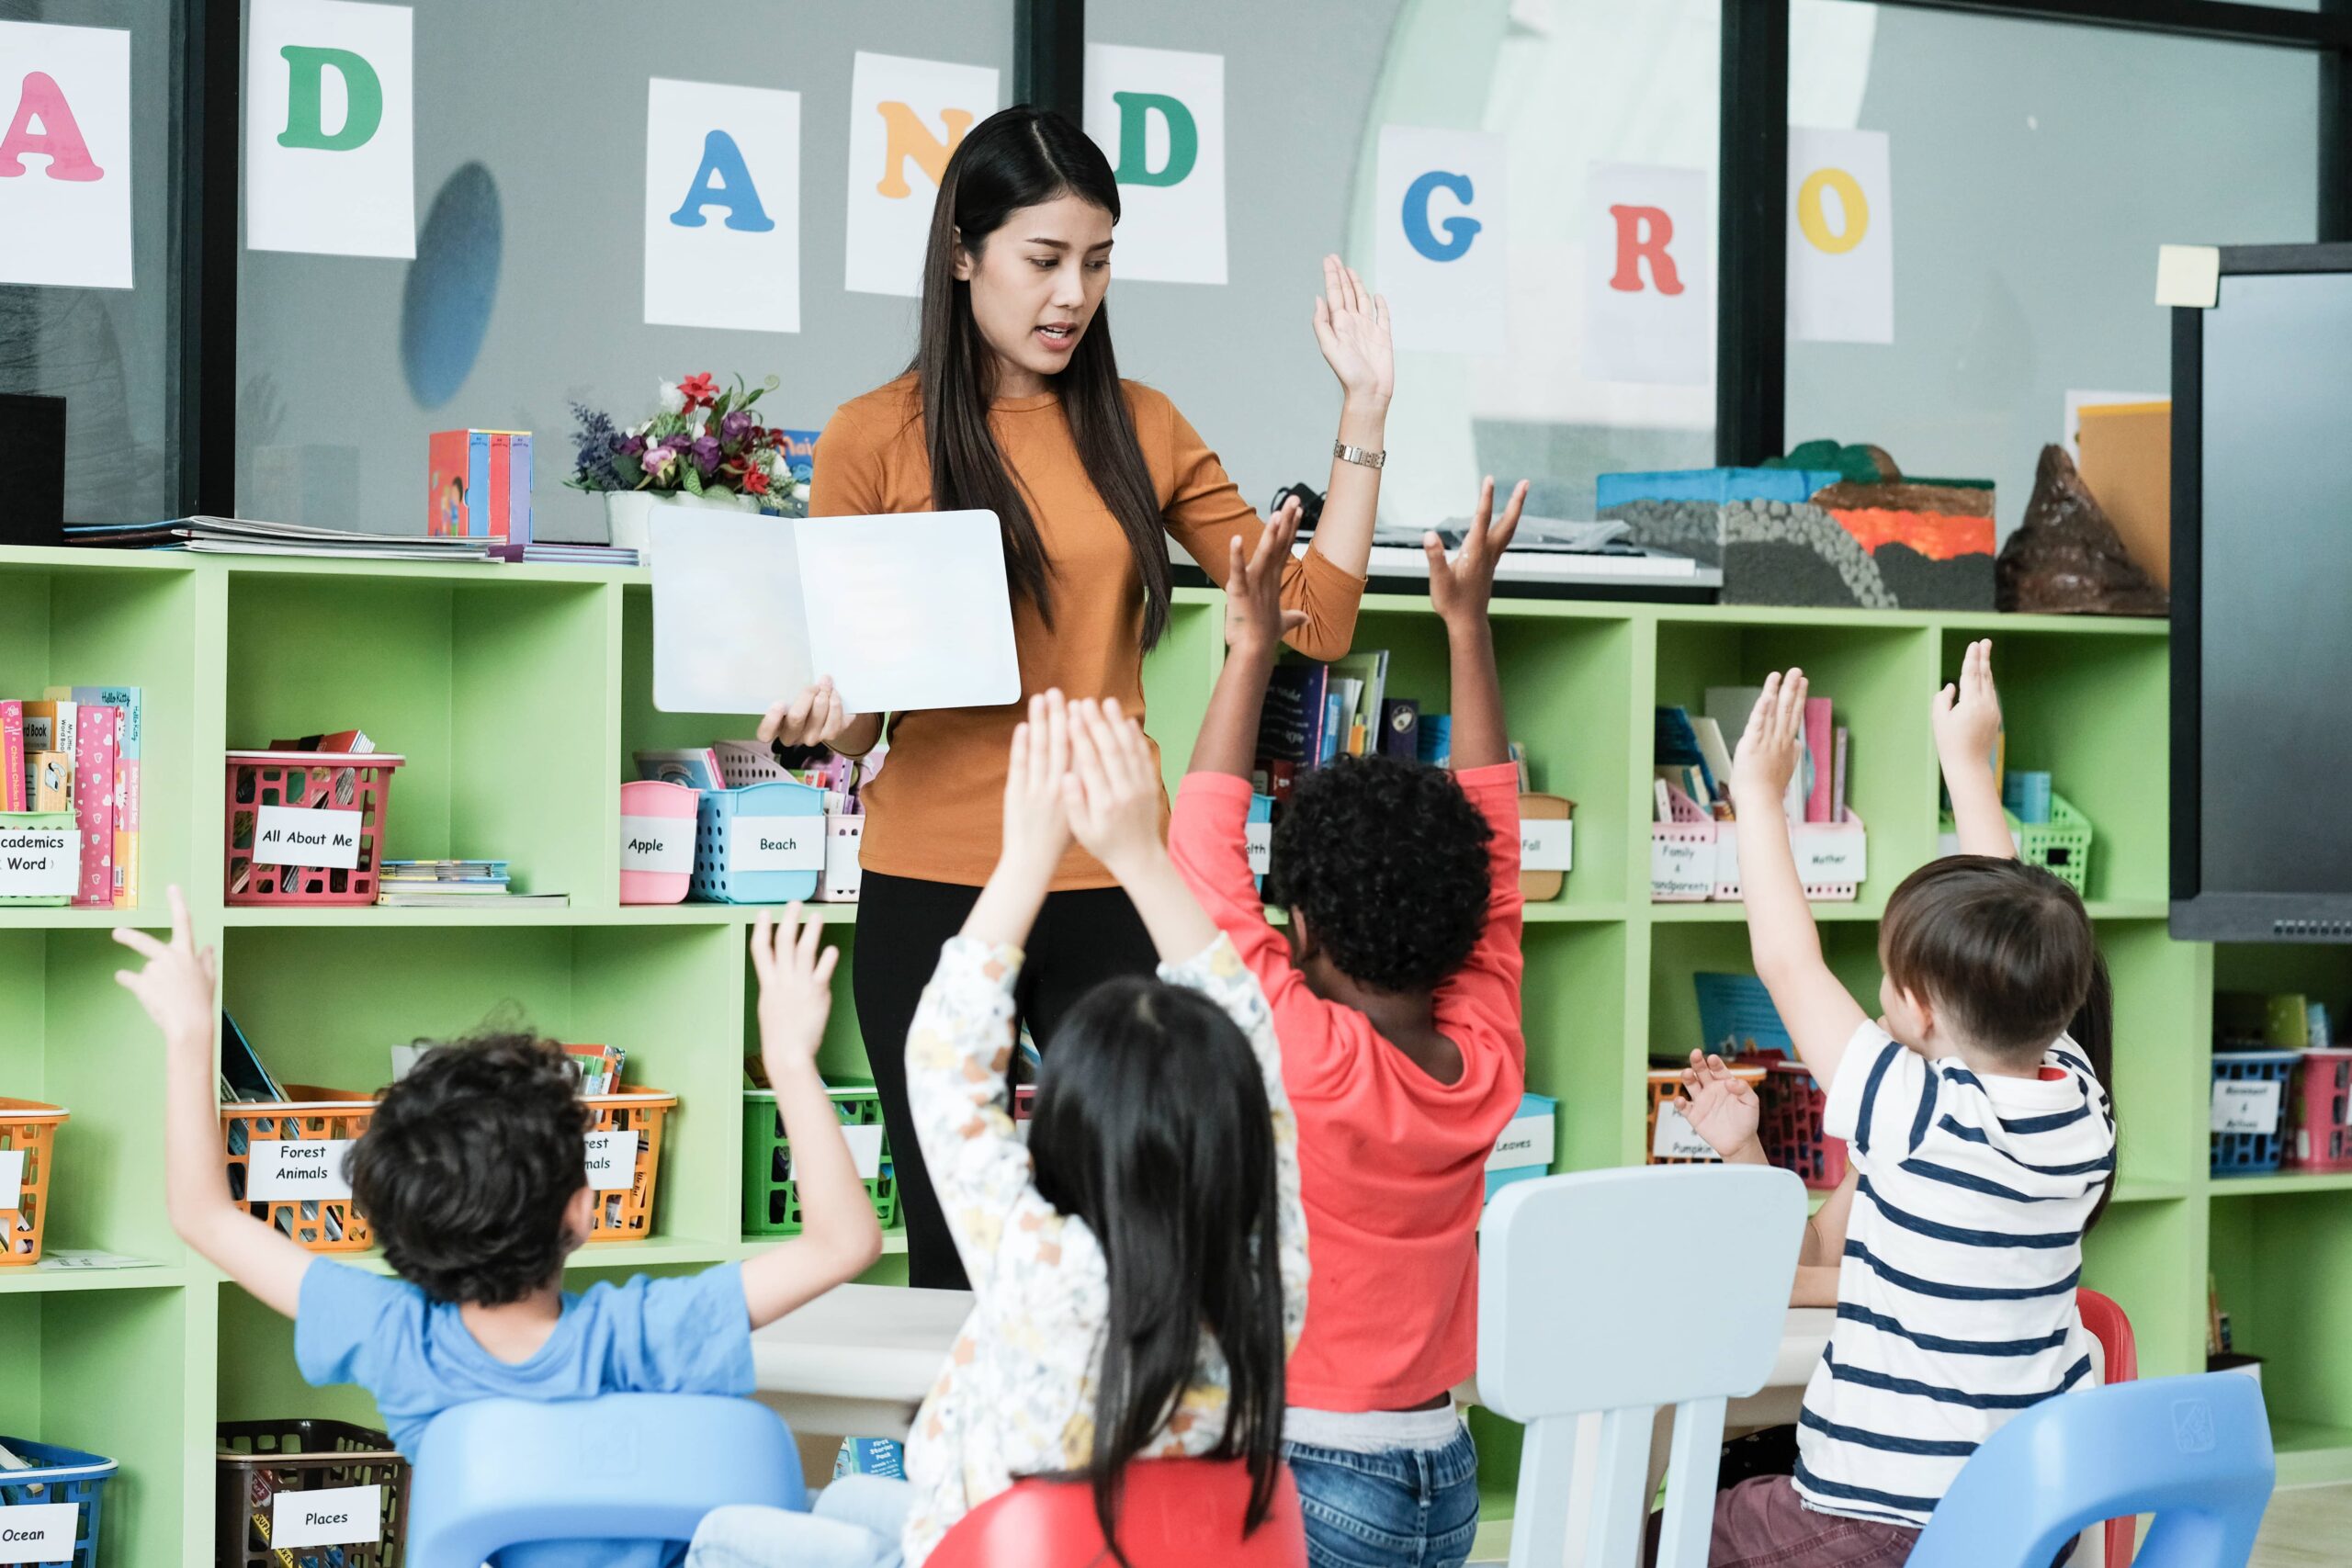 Teacher standing in front of young students reading a book. The teacher and the students have their hands raised. The classroom is colorful.